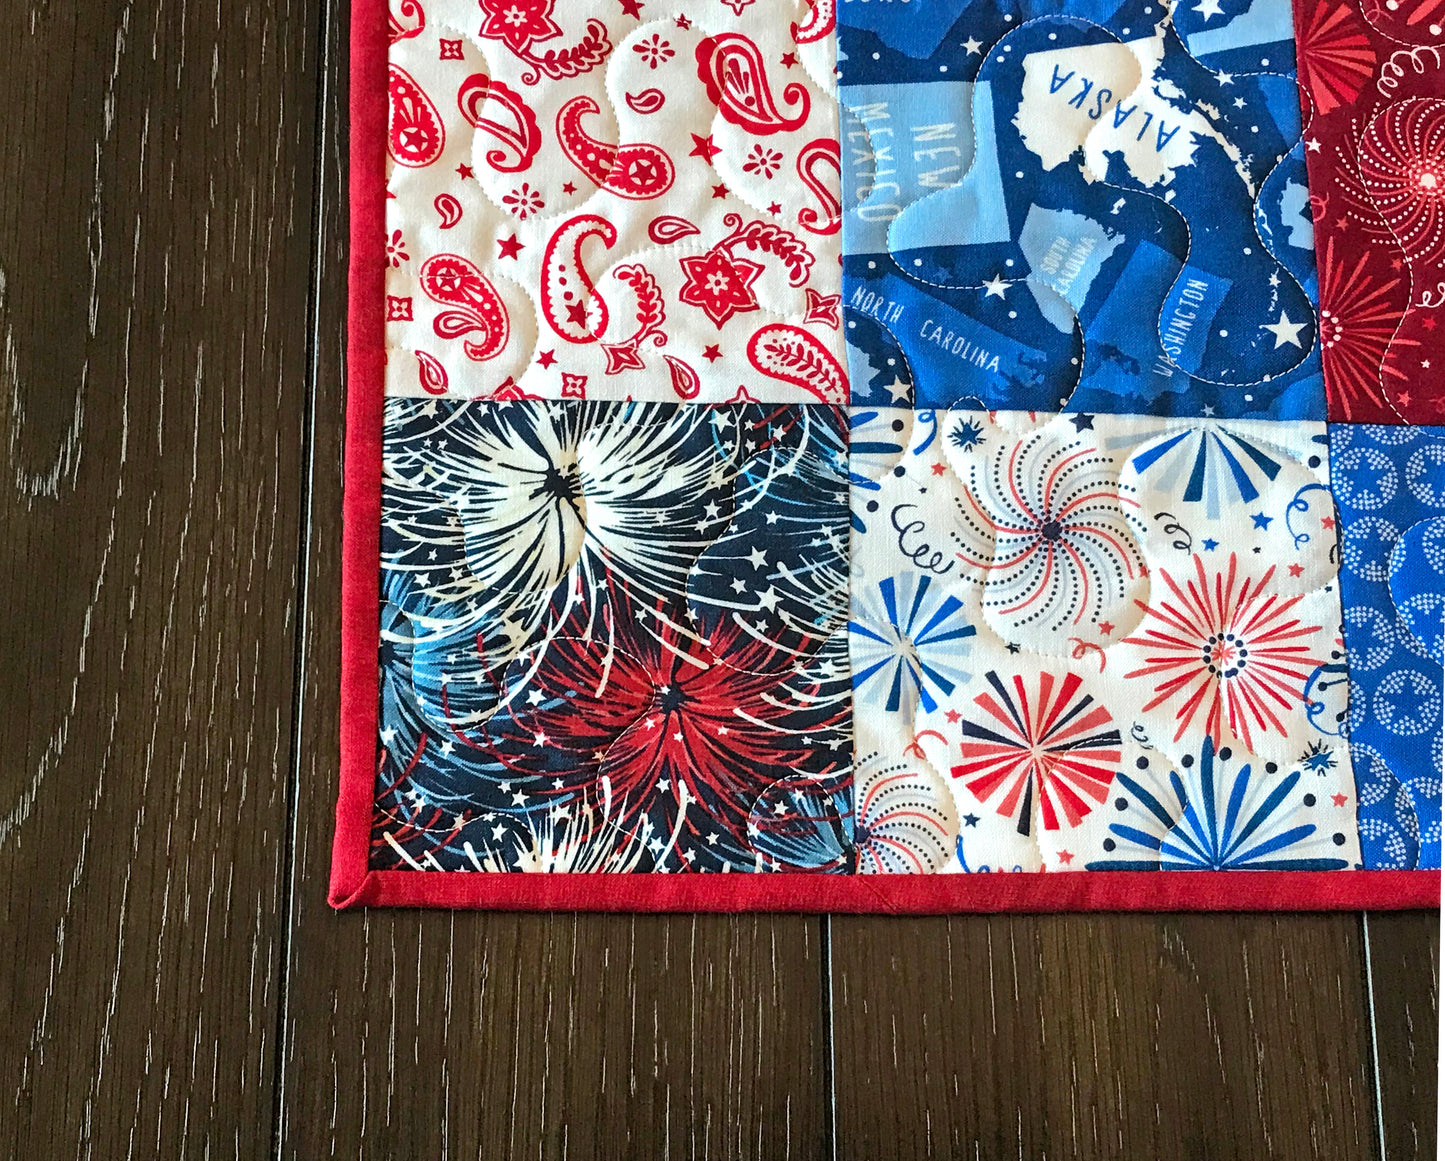 Patriotic Patchwork Table Runner - Handmade Quilts, Digital Patterns, and Home Décor items online - Cuddle Cat Quiltworks